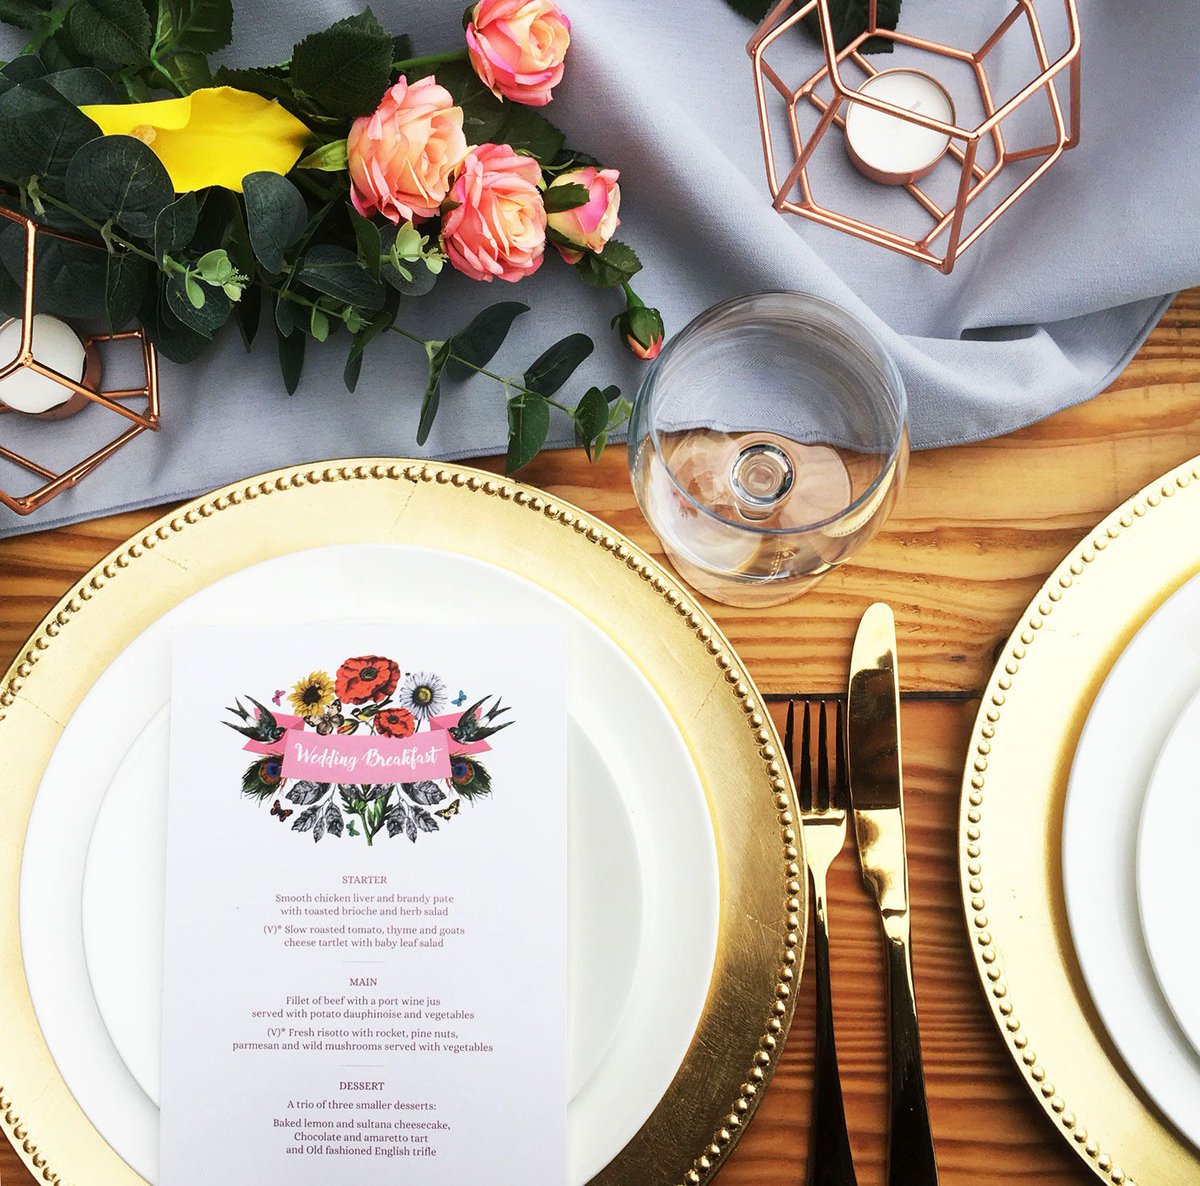 Why not bring some fresh bold colour to your placesetting! Stationery by @lovestruck_stationery #weddingtableware #placesettings #rusticweddings #goldwedding #colourfulwedding #weddingstationery #rustictable